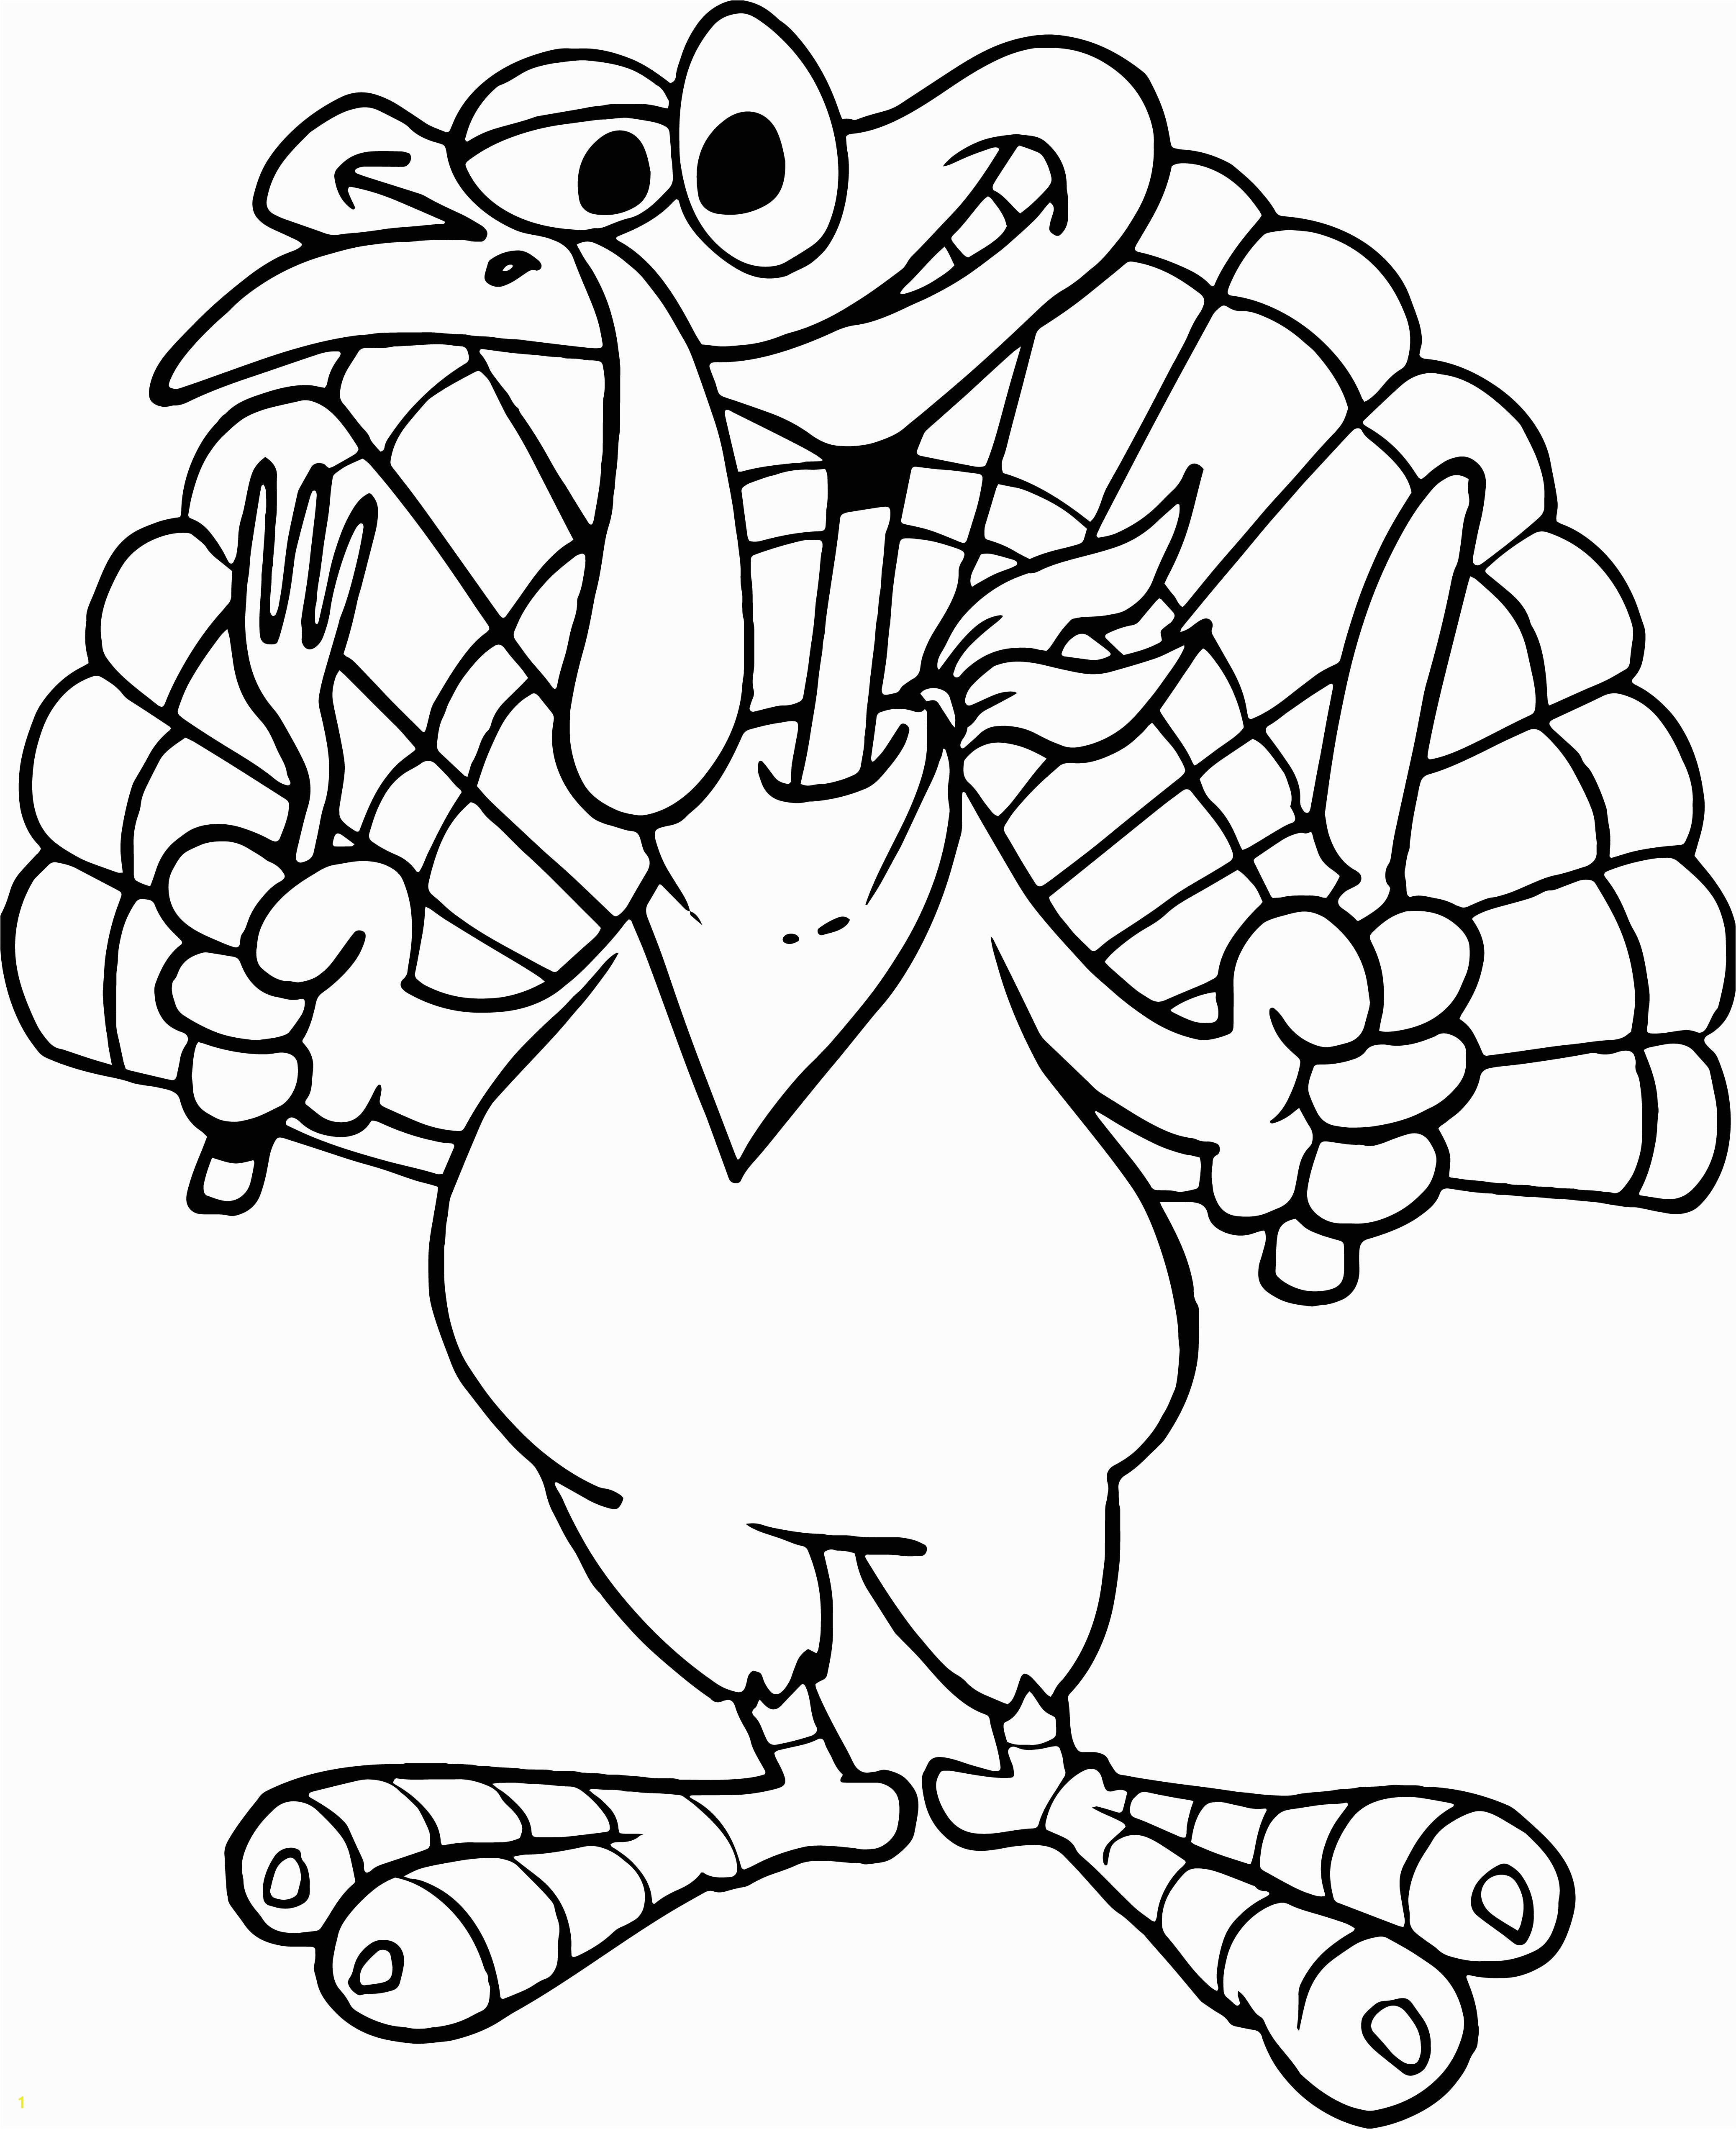 Black and White Turkey Coloring Pages Reduced Turkey Outline Printable Coloring Page New Color Archives